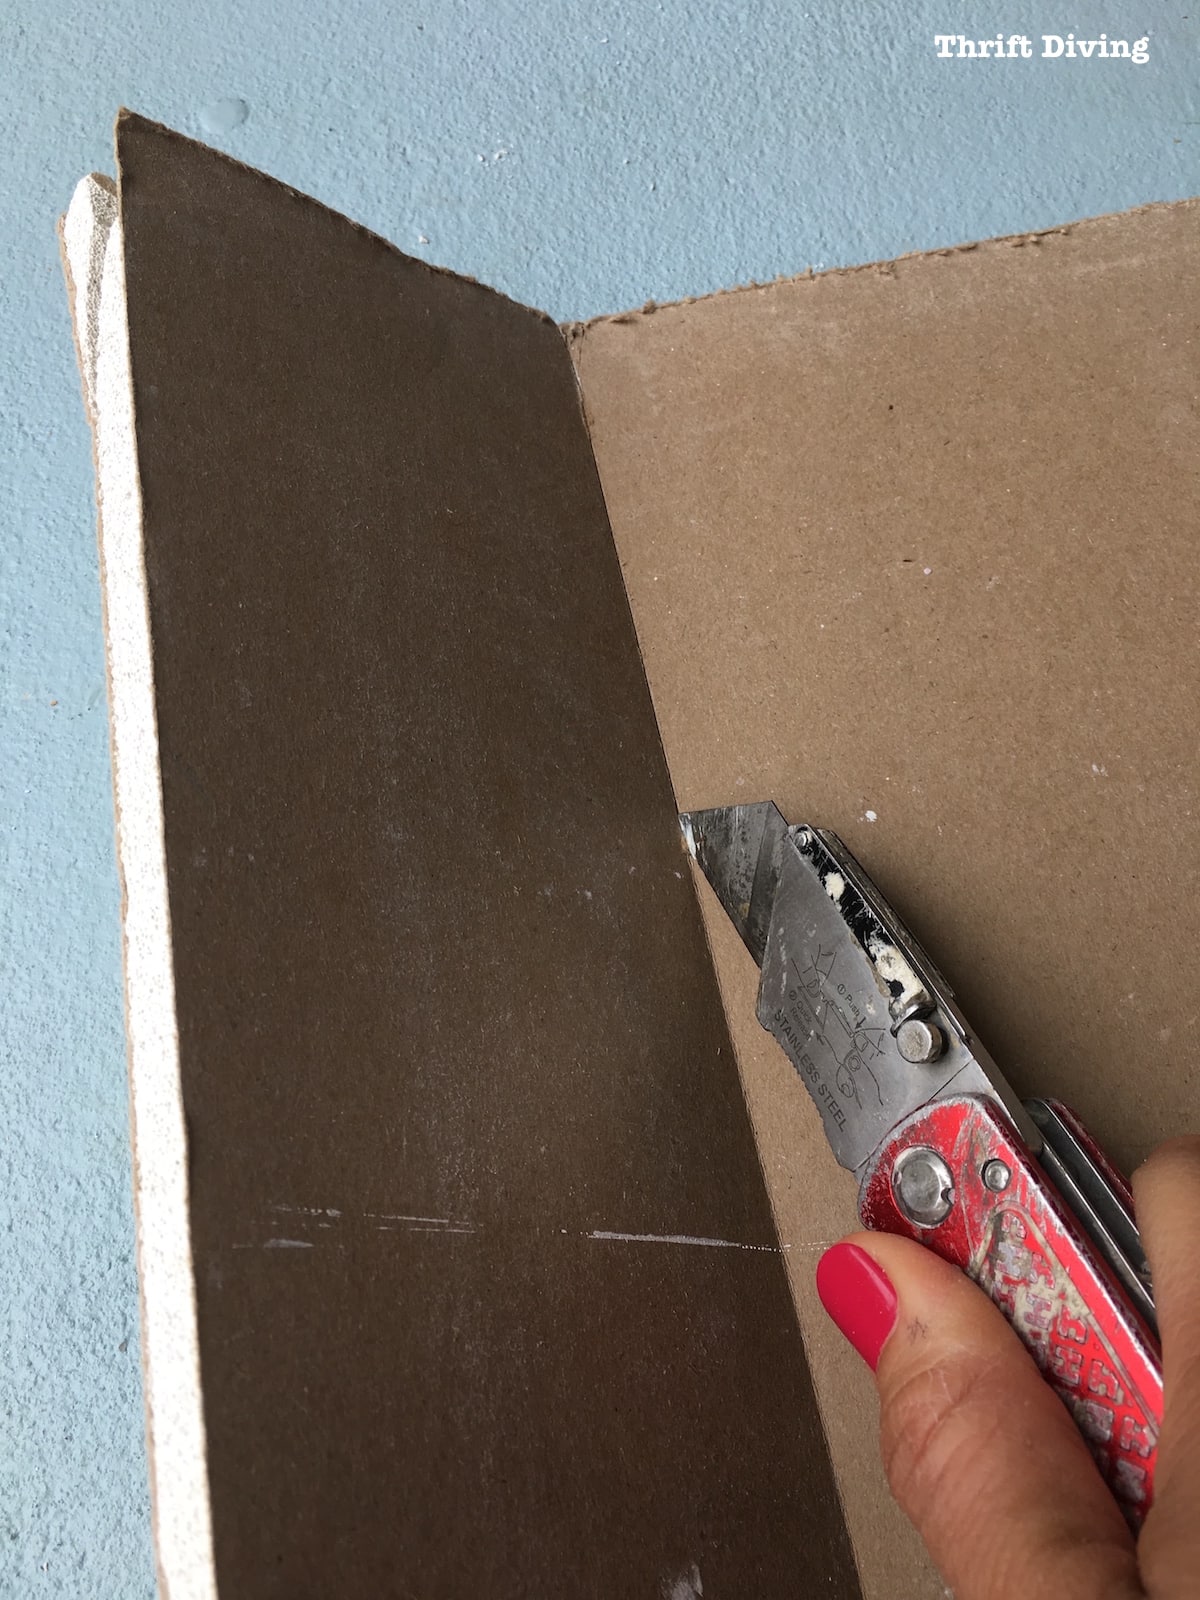 How-to-fix-big-holes-in-drywall-repair-Thrift-Diving - 74